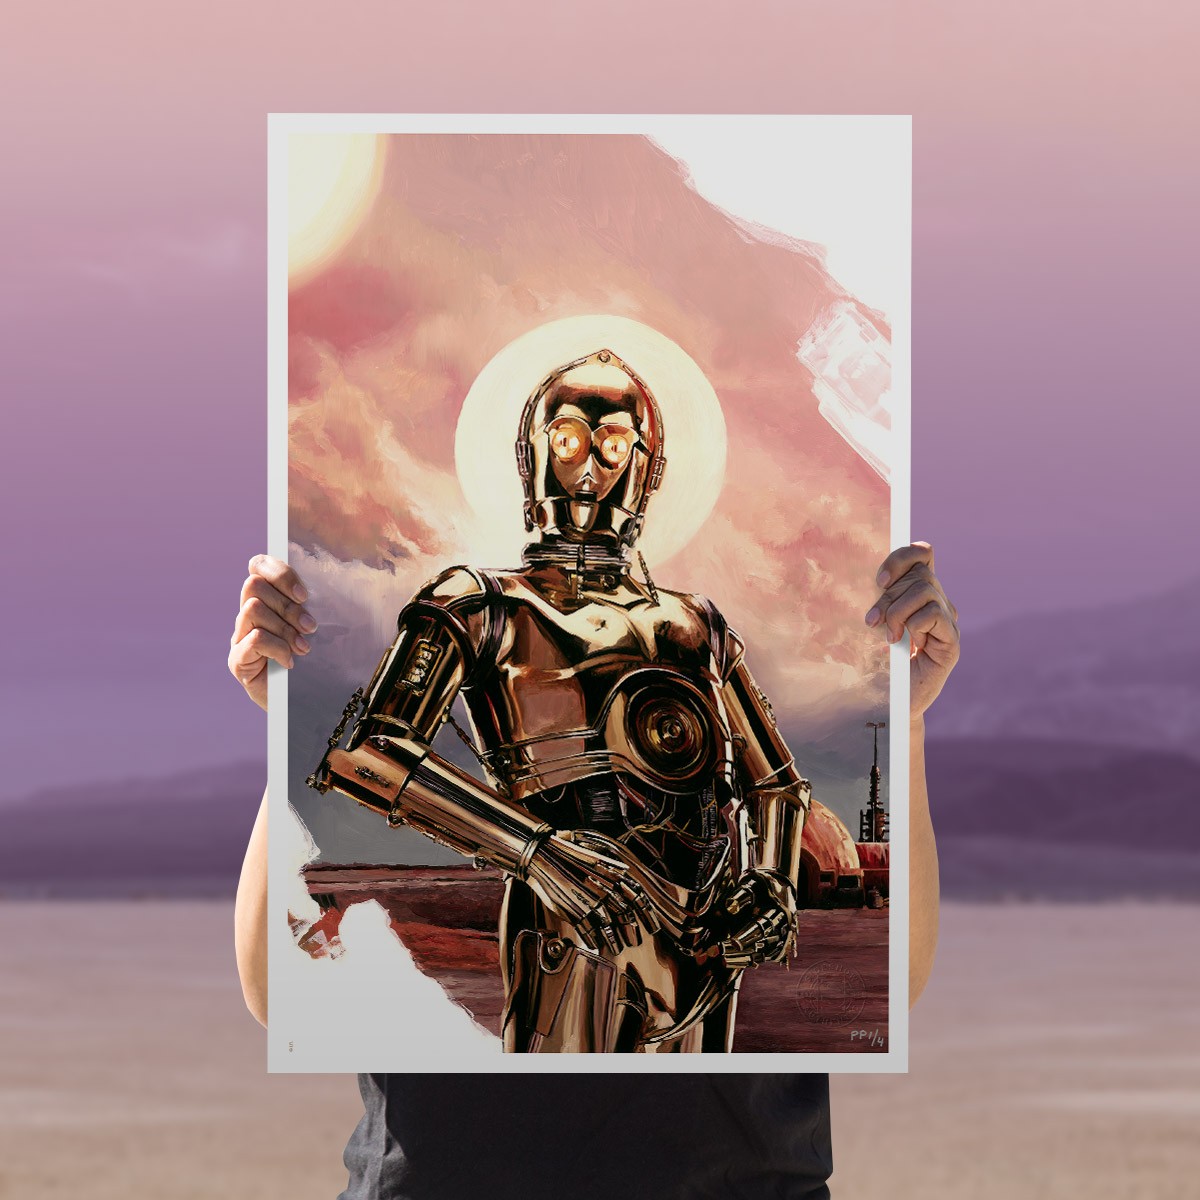 by A | Hope: Fine Print New Art Chris C-3PO Sideshow Valentine Collectibles